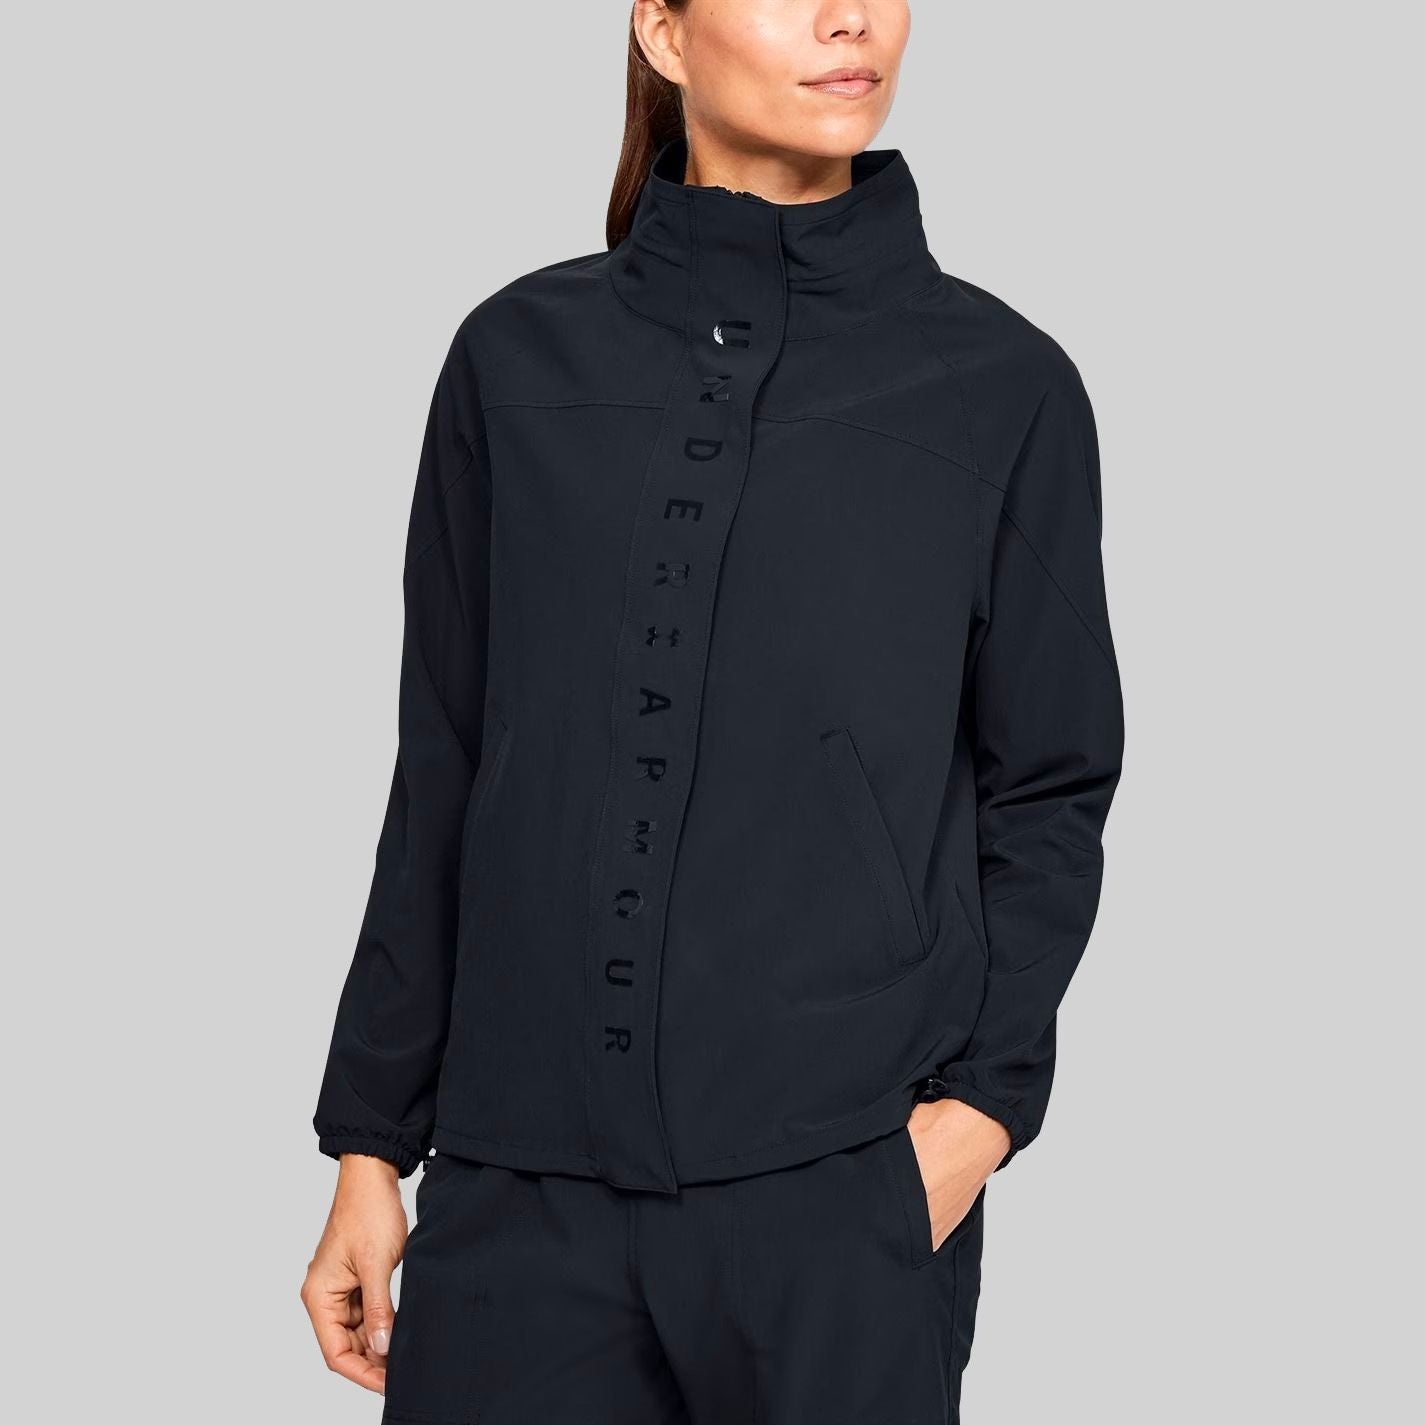 Womens Under Armour Woven Jacket